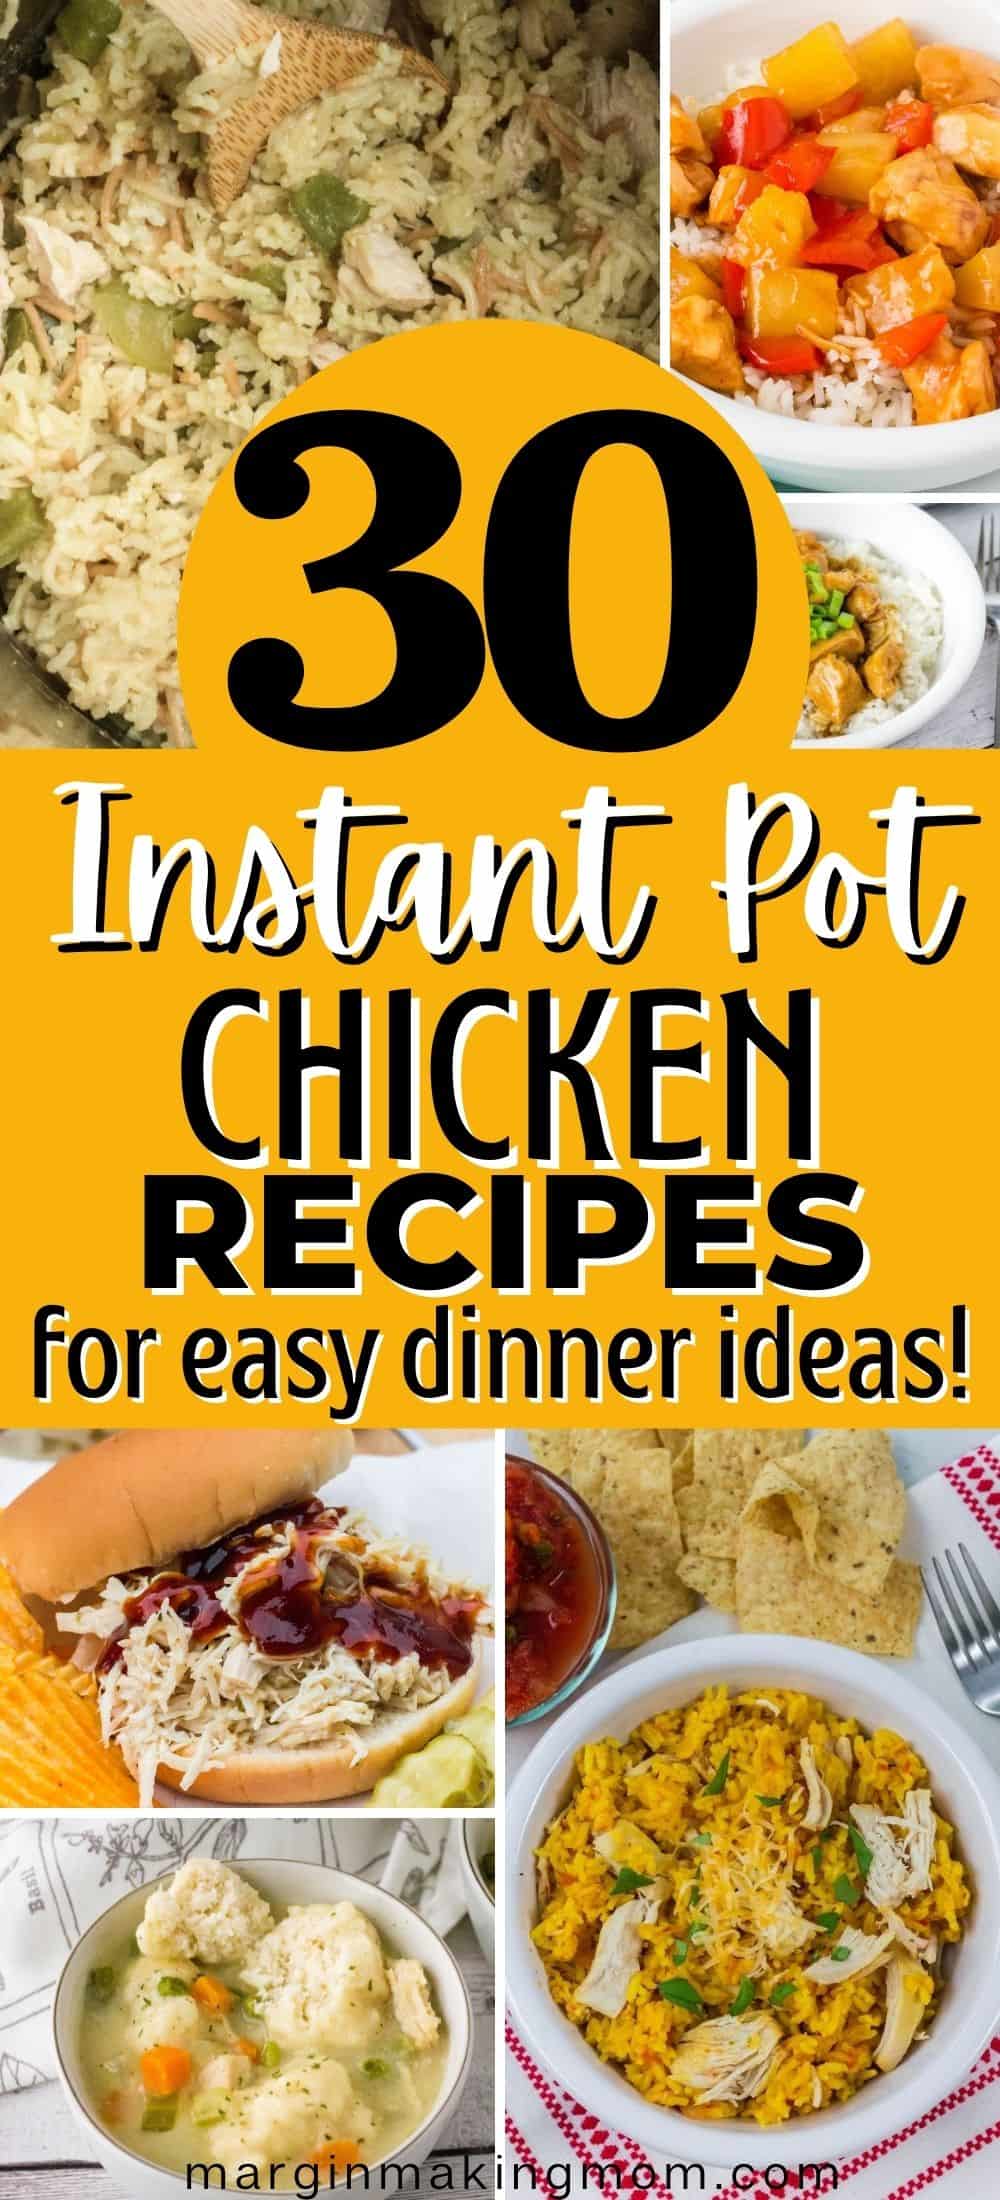 collage image featuring various pressure cooker chicken dinner recipes, with an overlay that reads, "30 Instant Pot Chicken Recipes for easy dinner ideas"